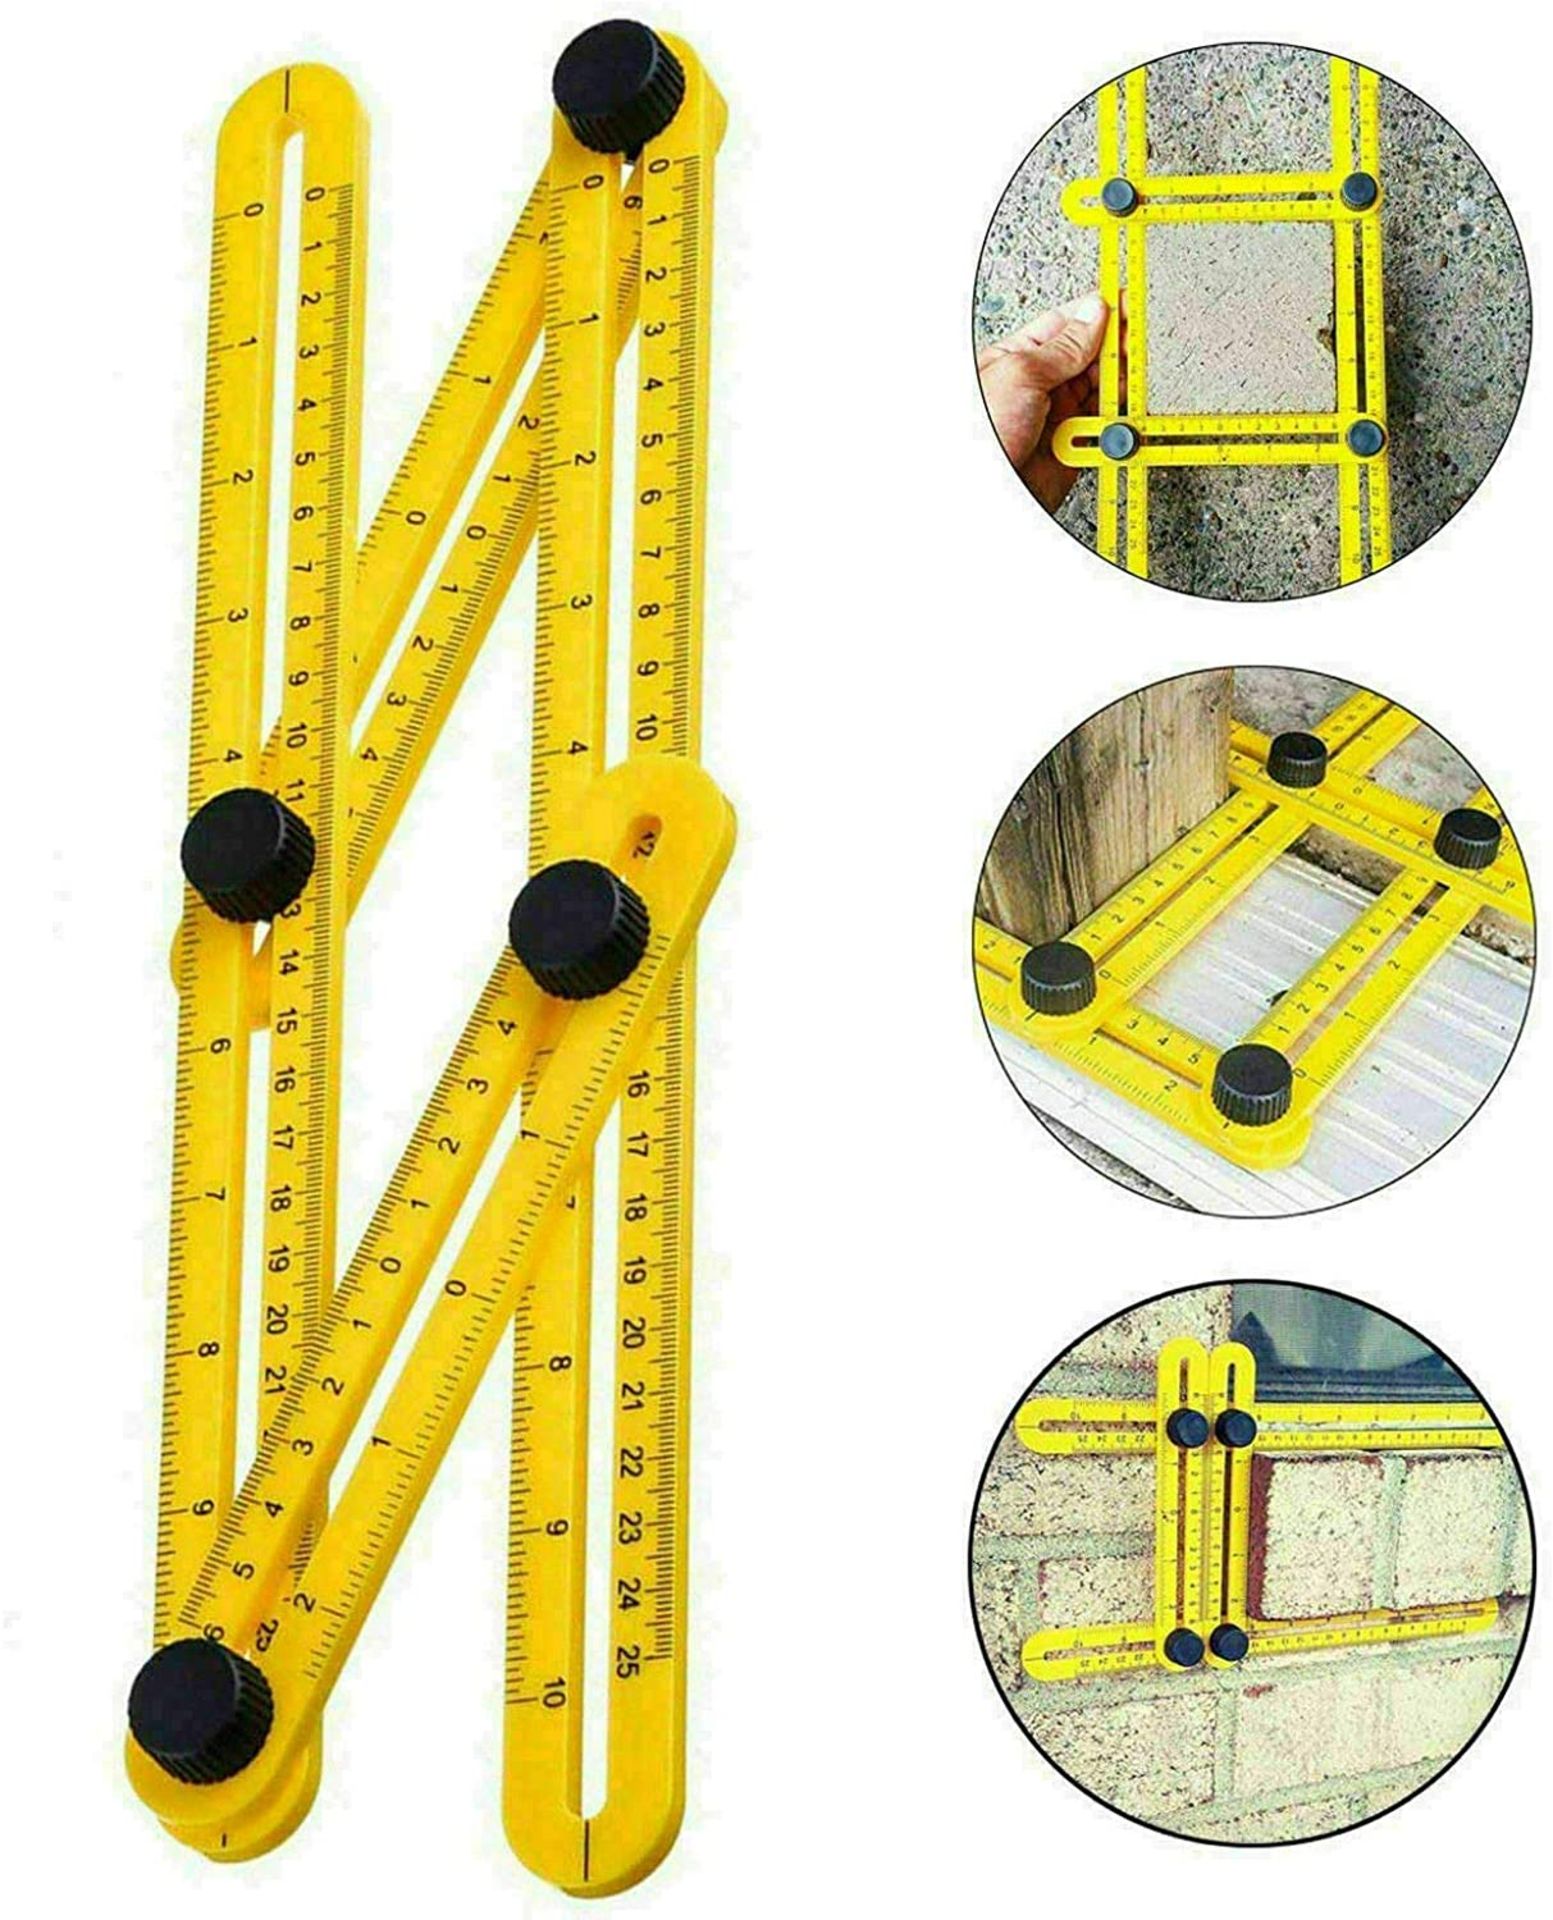 RRP-£2 Angleizer Multi Angle Template Tile Floor Measuring Side Ruler Instrument Tools